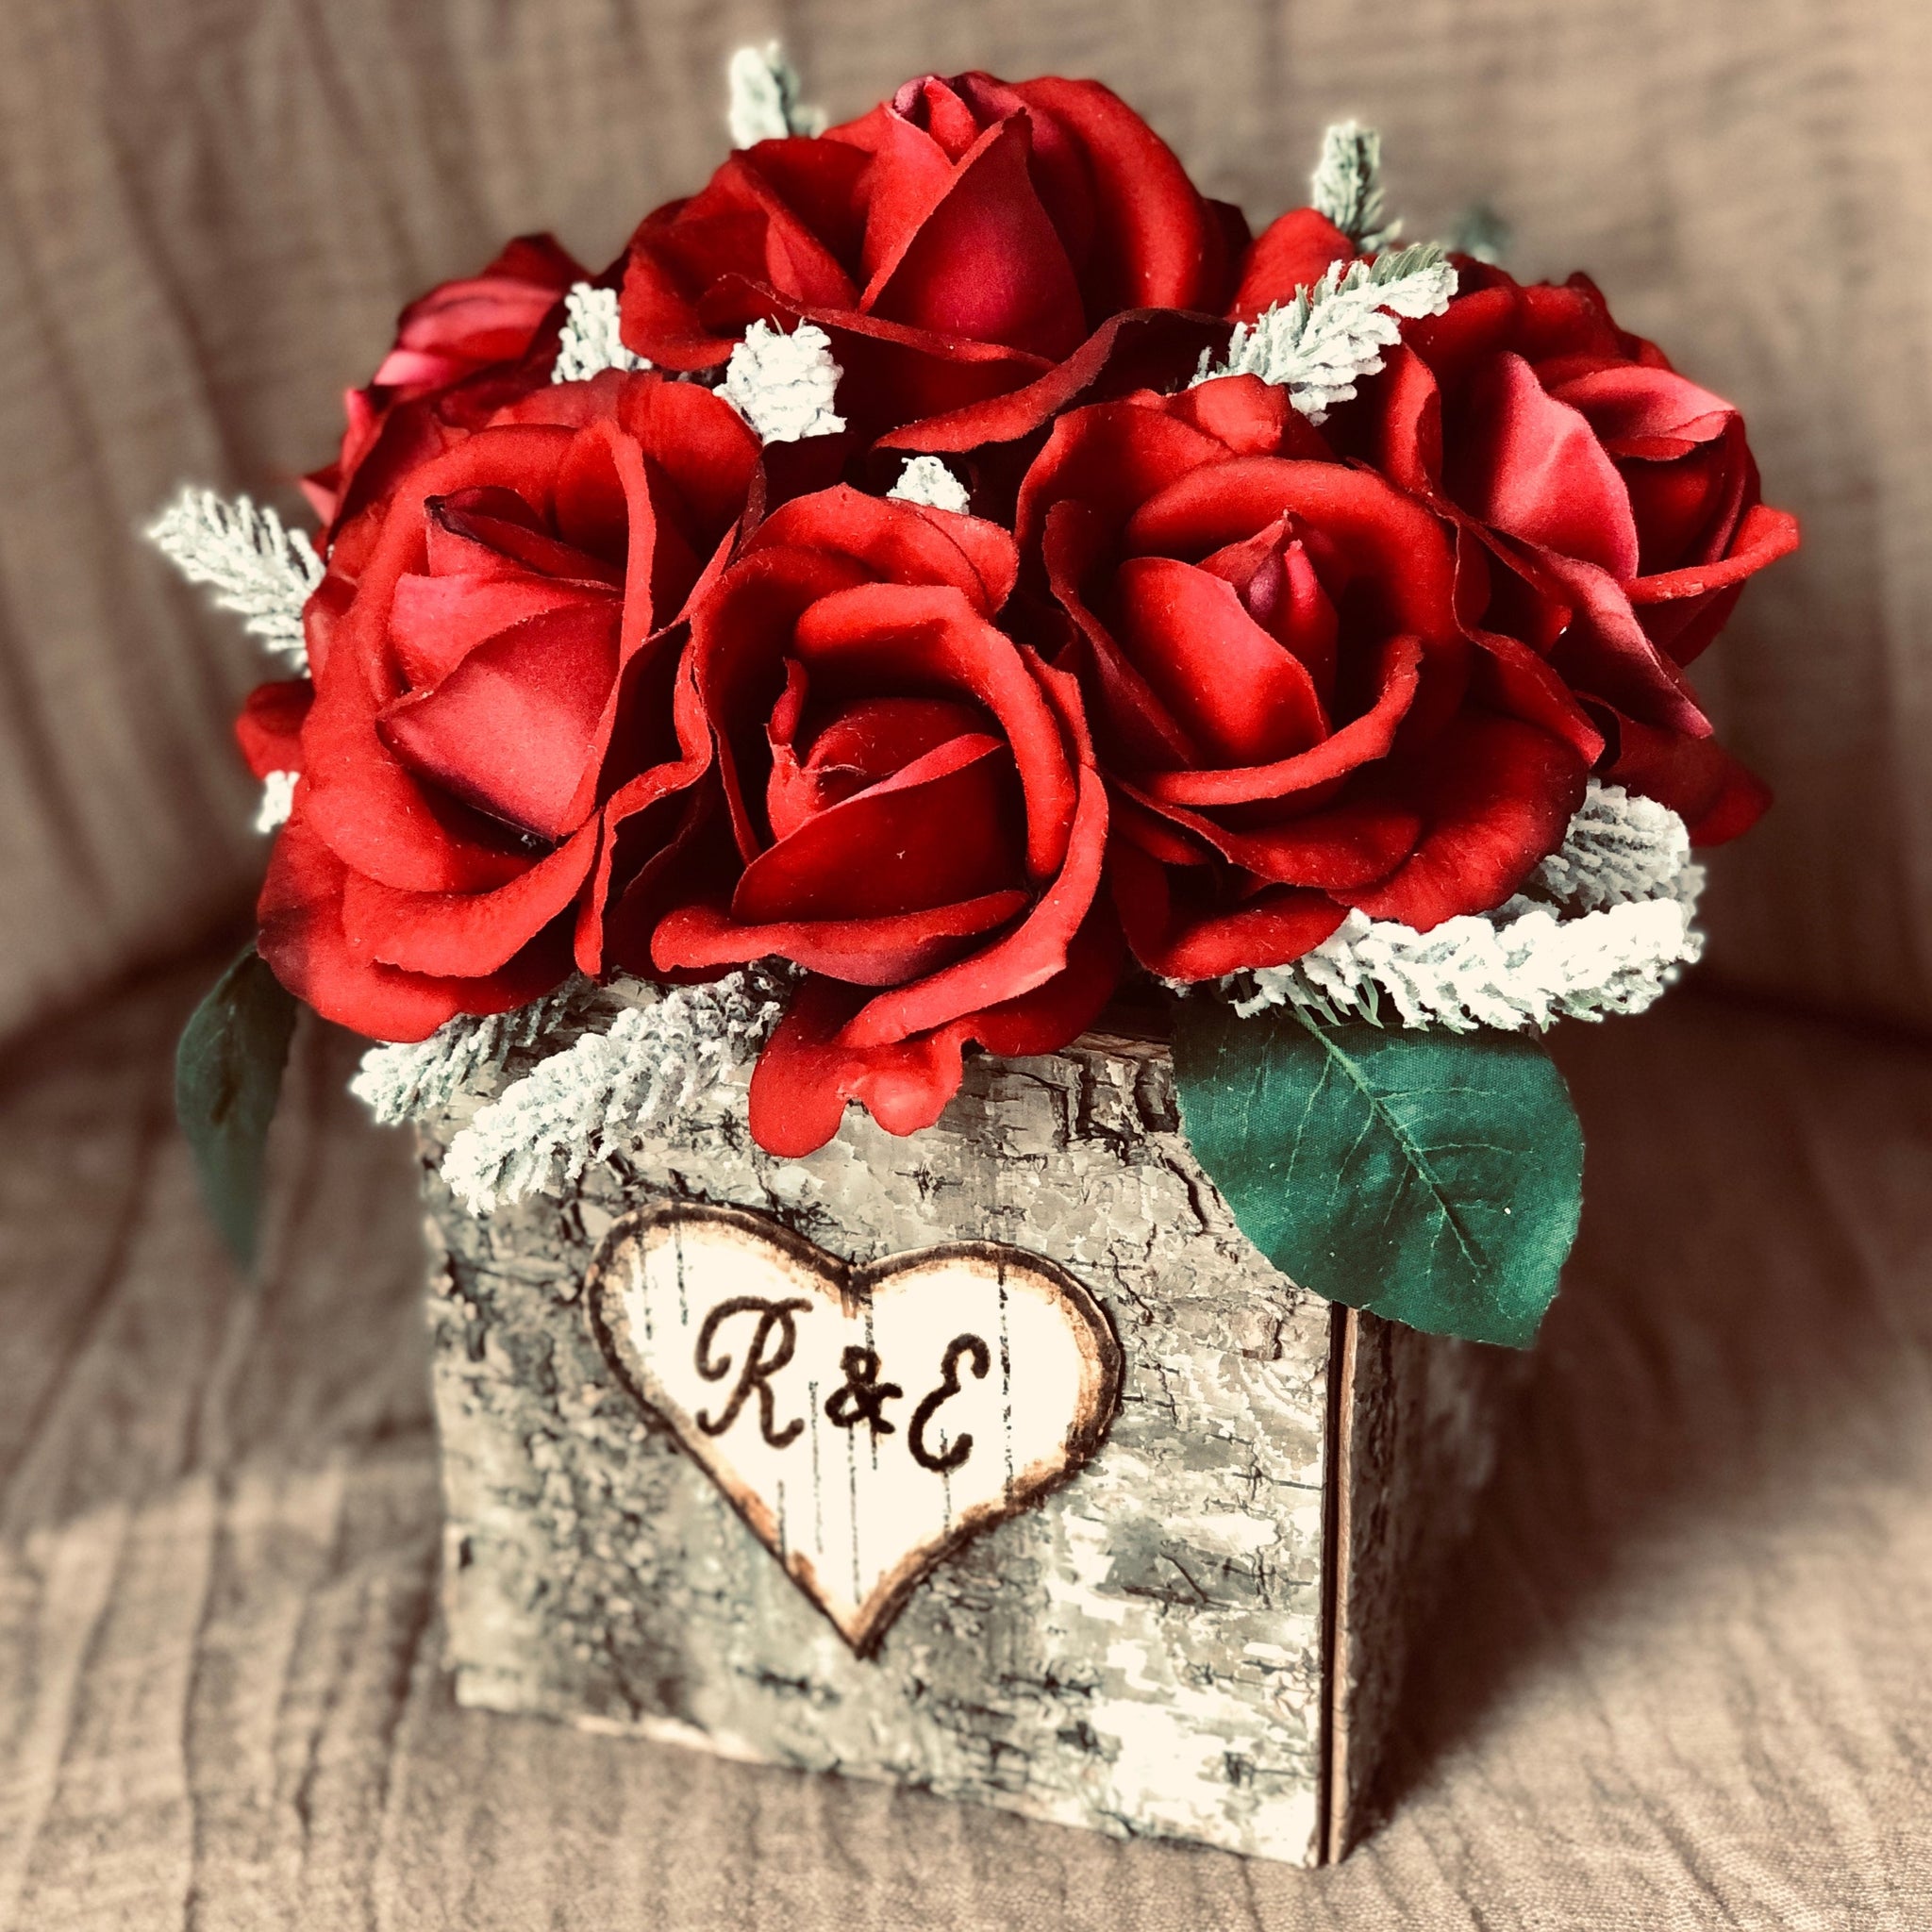 MANTOUSS Valentines Day Gift for Girlfriend/Boyfriend/Husband/Wife/finace-Beautiful  Basket+Chocolates in a Decorated Box+Fur Love Heart+Message Bottle+Scented  Candle+Valentines Day Card : Amazon.in: Grocery & Gourmet Foods